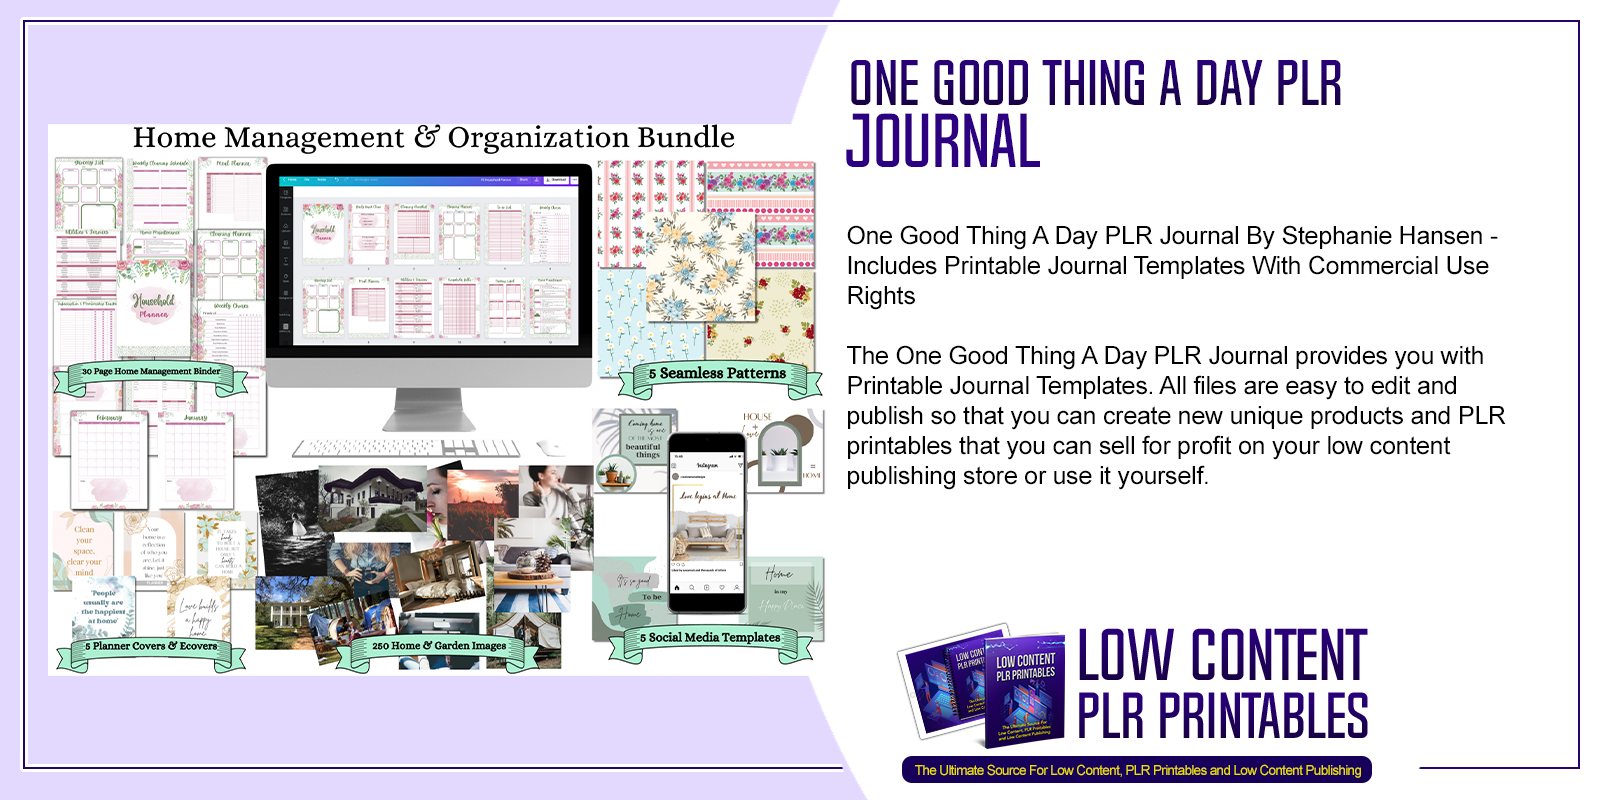 One Good Thing A Day PLR Journal